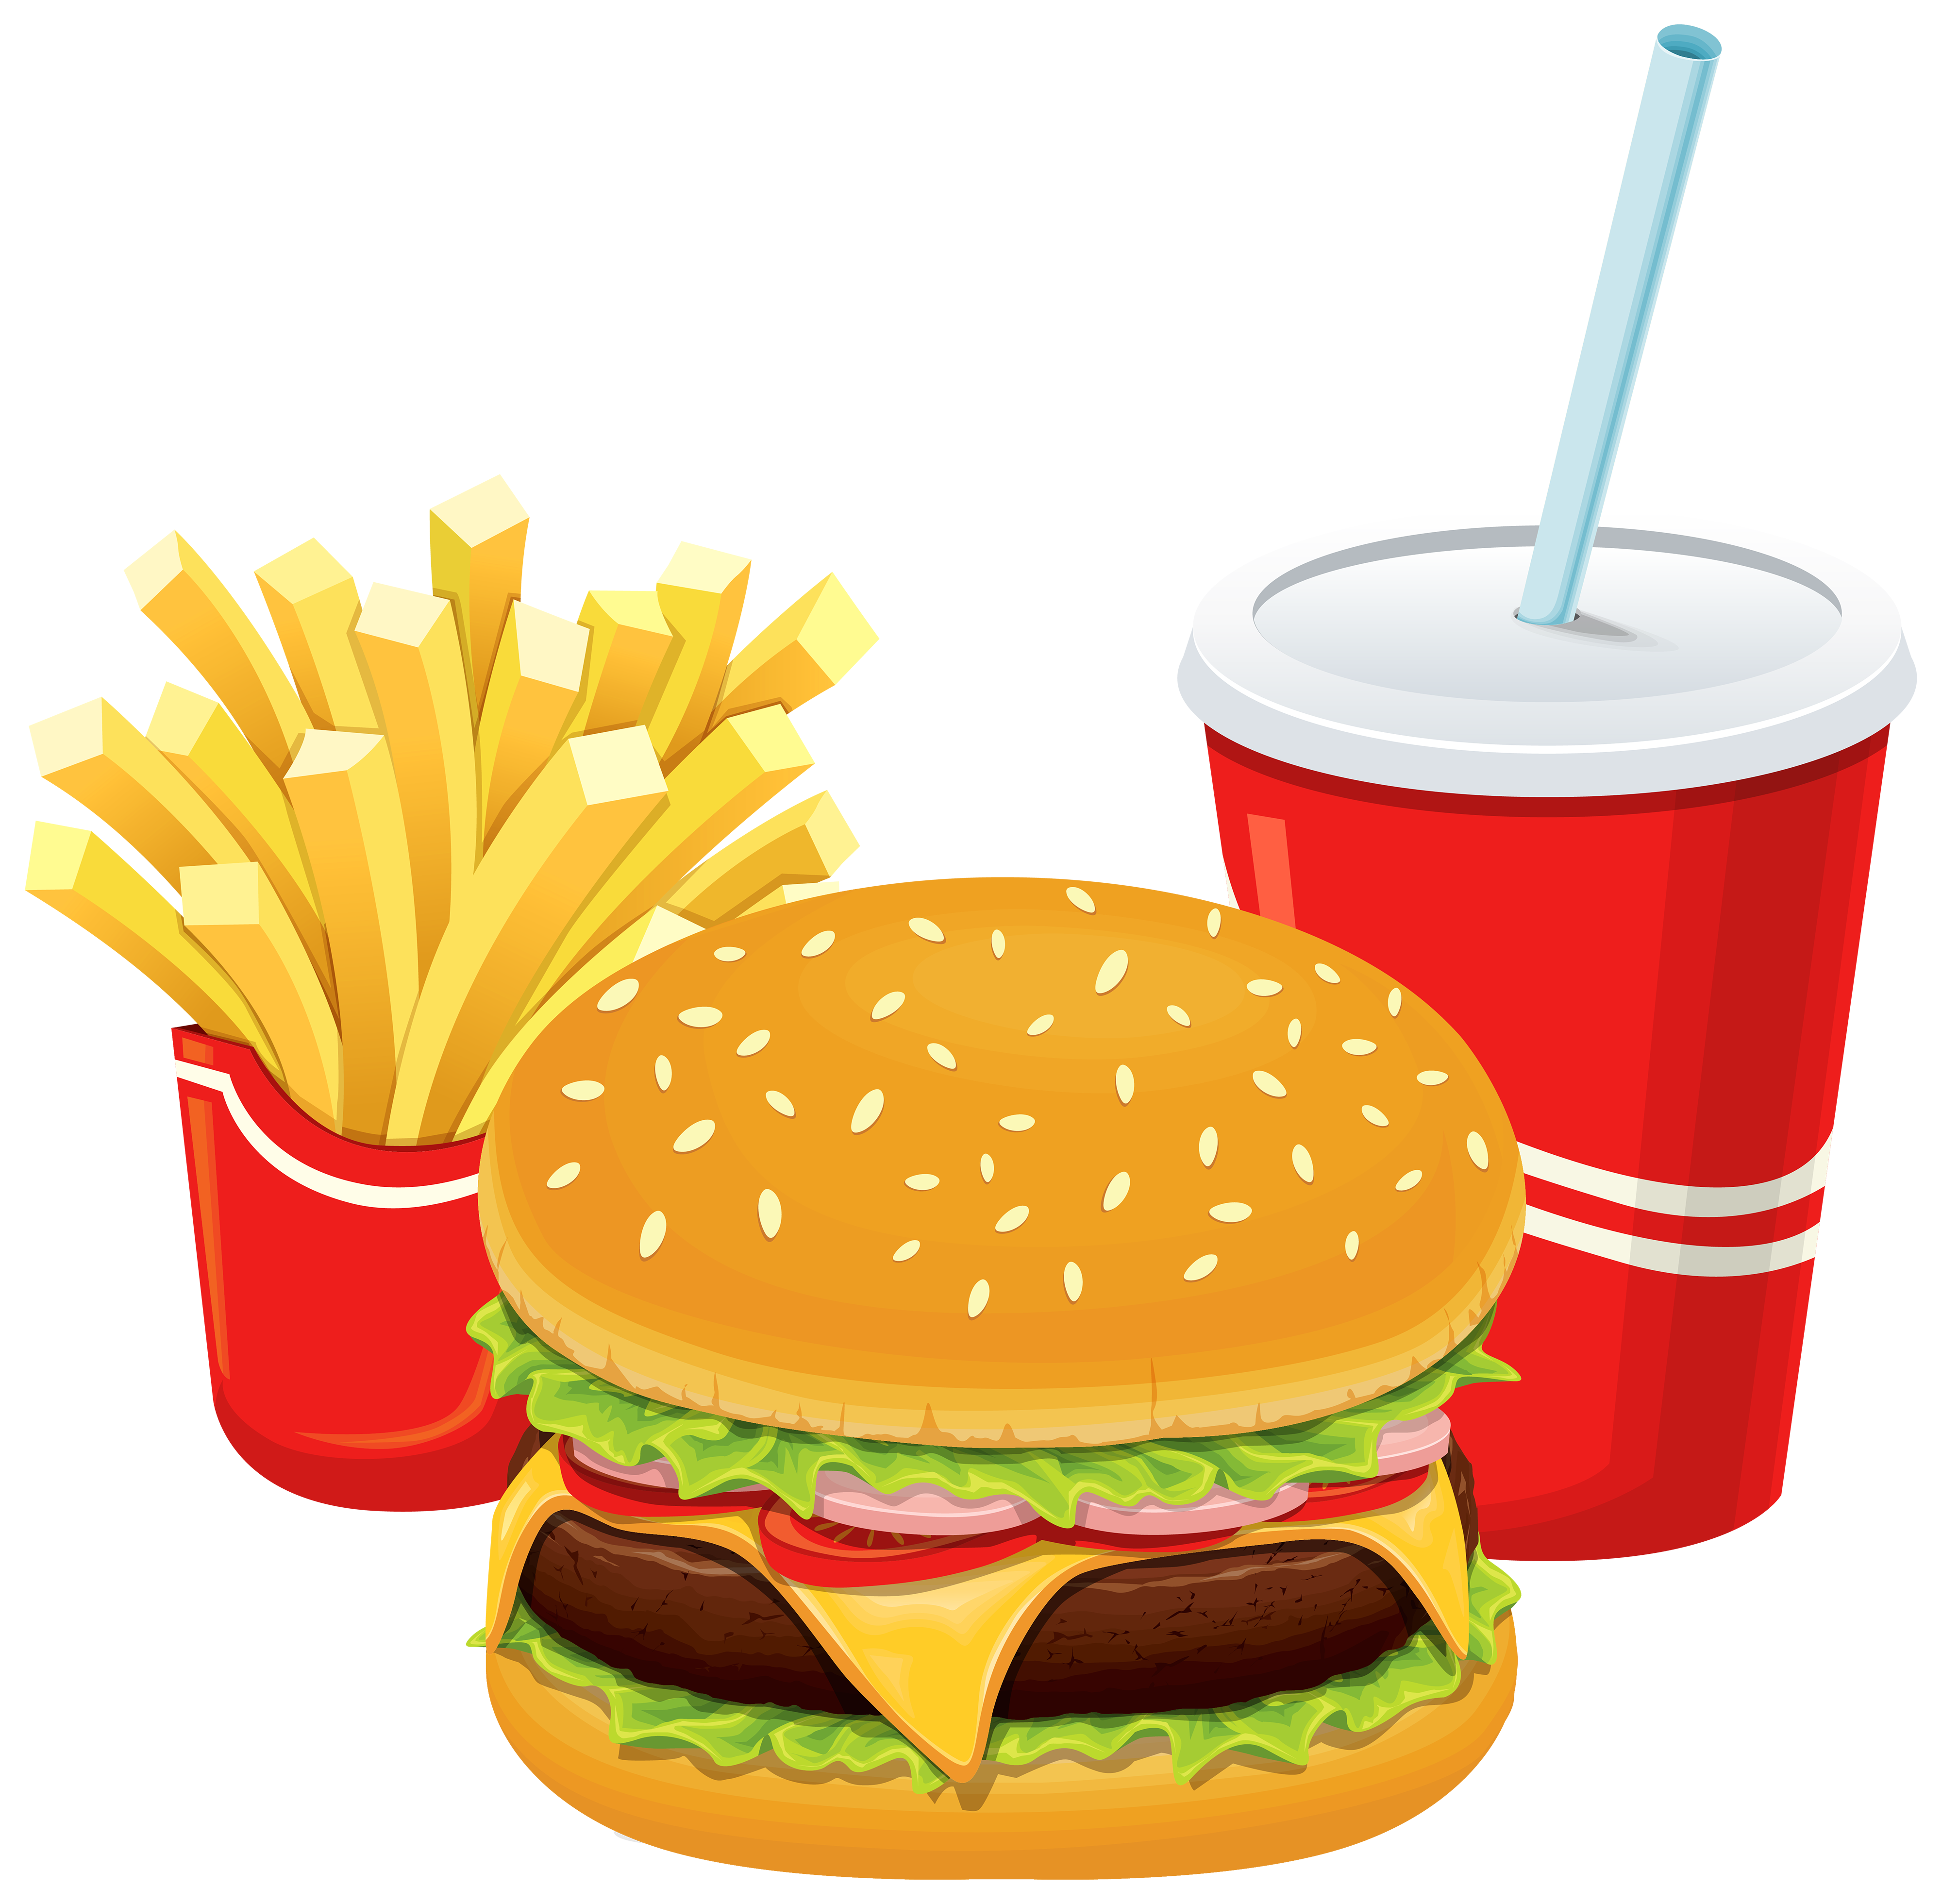 Gallery Free Clipart Picture… Fast Food PNG Clipar… Sandwich with.